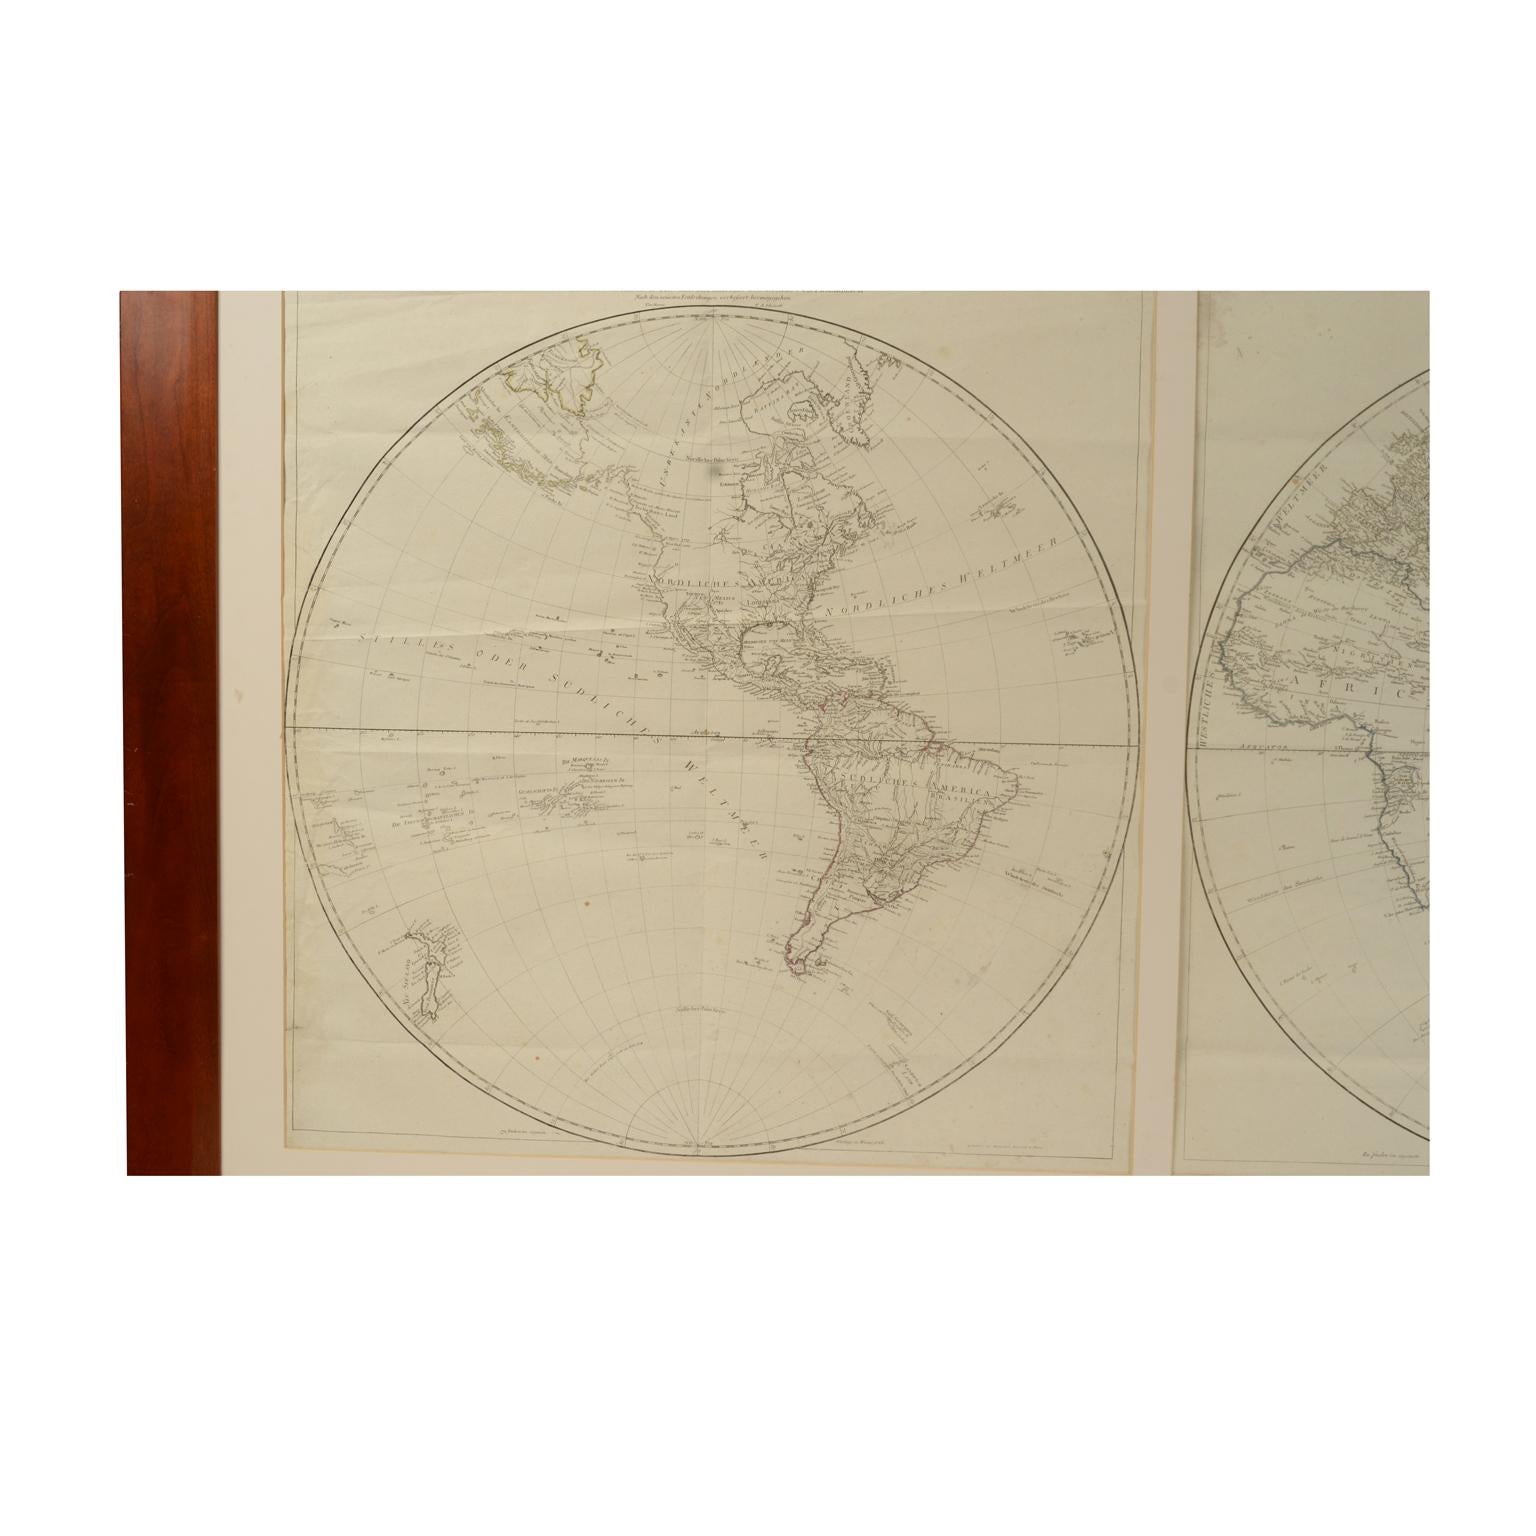 Large world map by cartographer Jean Baptist D'Anvile revised and republished in Vienna in 1786 by Franz Anton Schraembl. It is a geographical map printed by engraving on a copper plate, light coloring Coeval at the borders, which depicts the entire